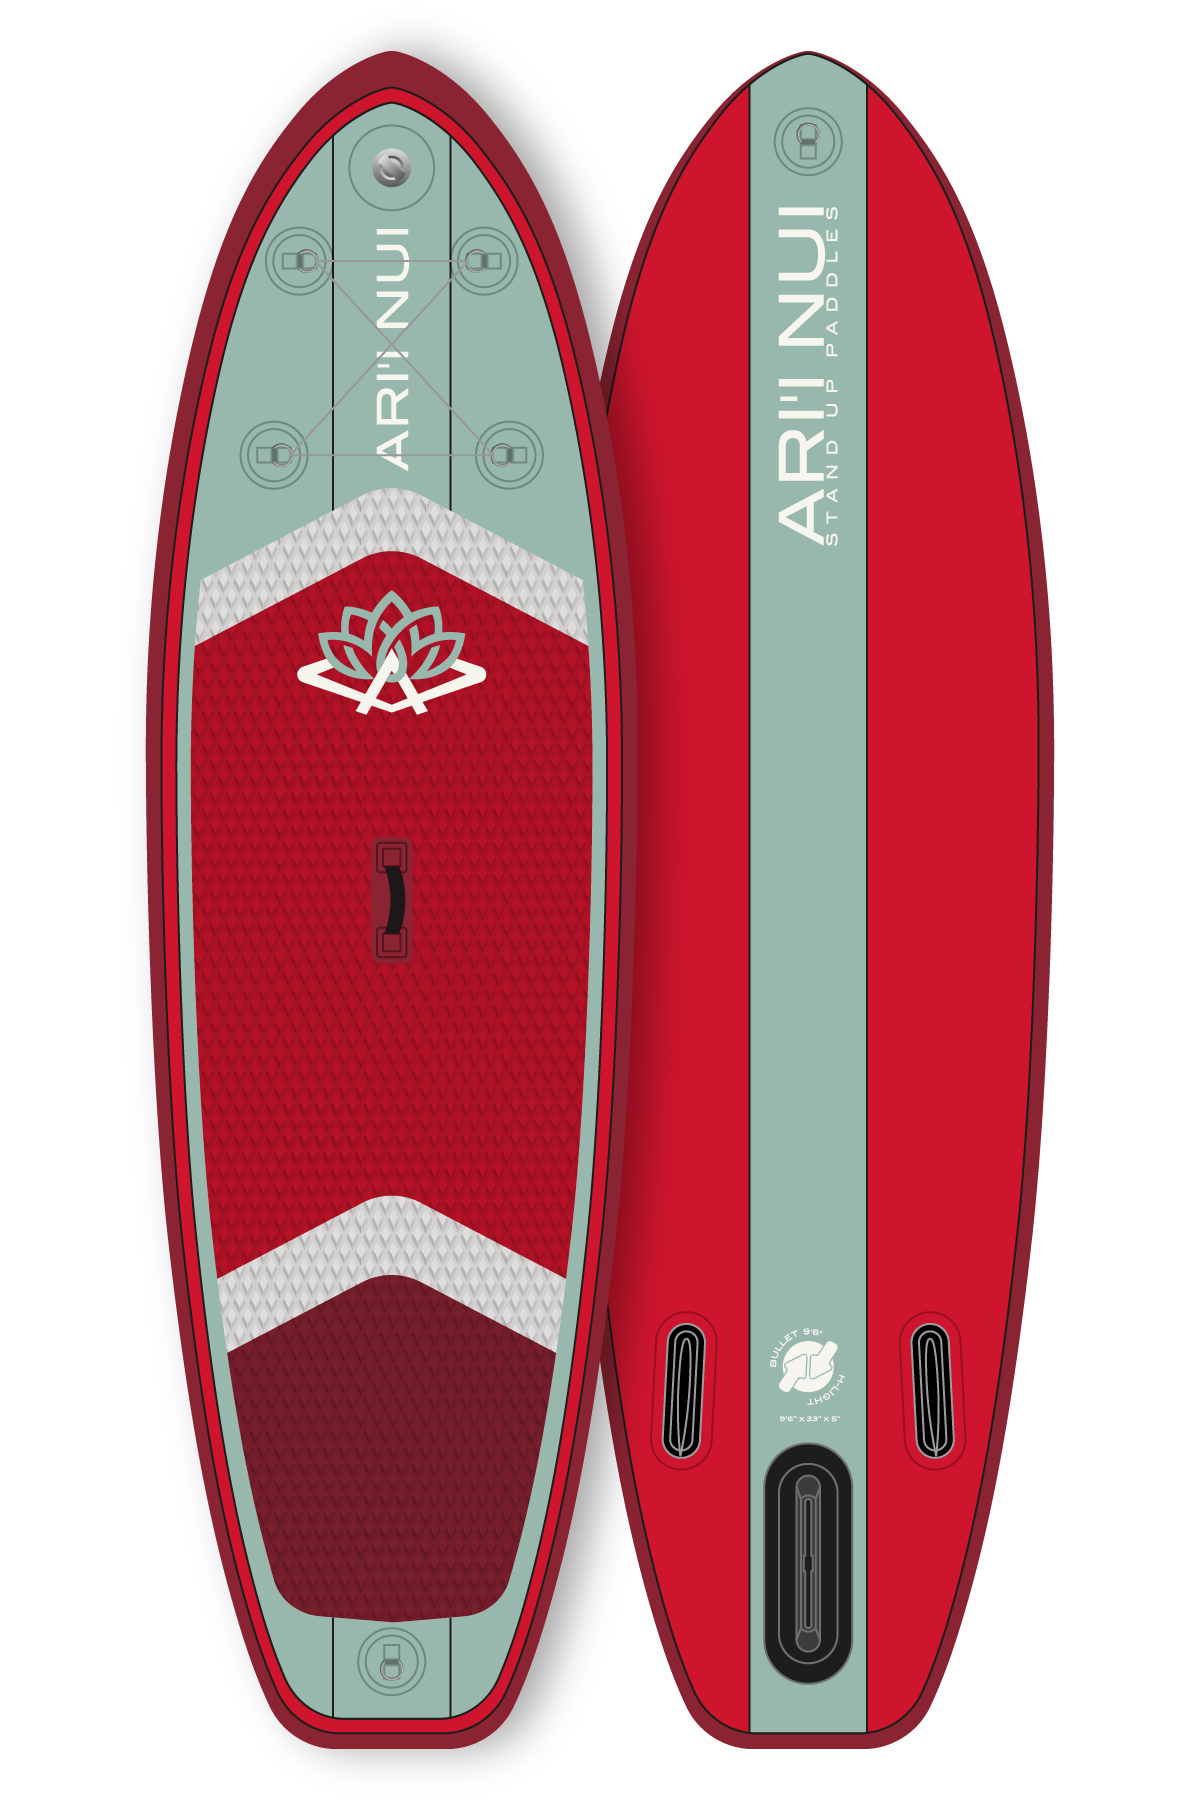 BULLET 9'6" - SUP inflável